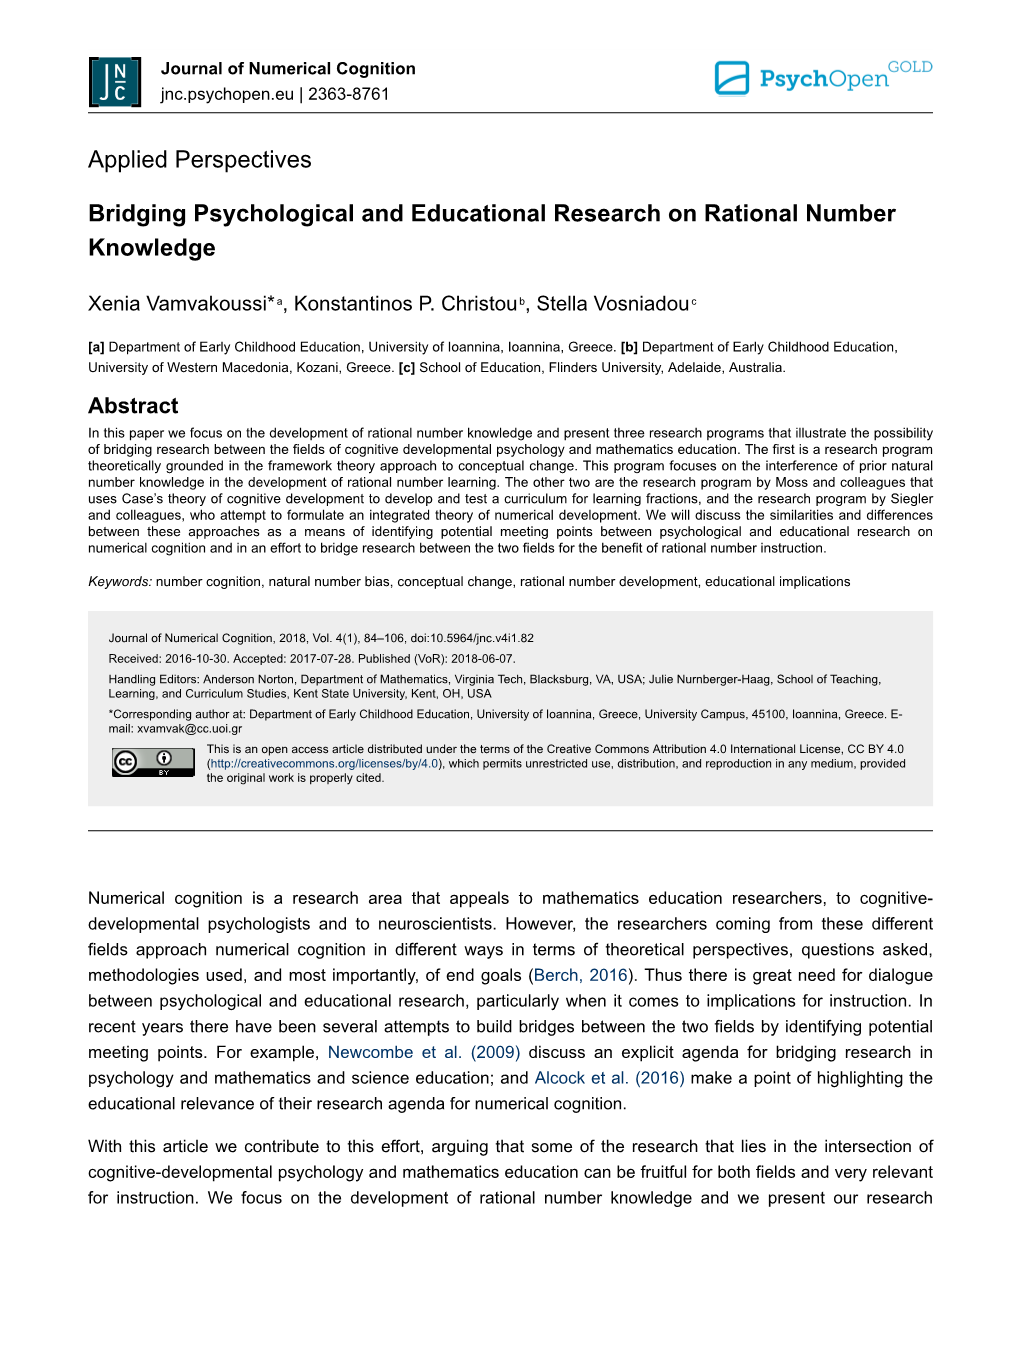 Bridging Psychological and Educational Research on Rational Number Knowledge